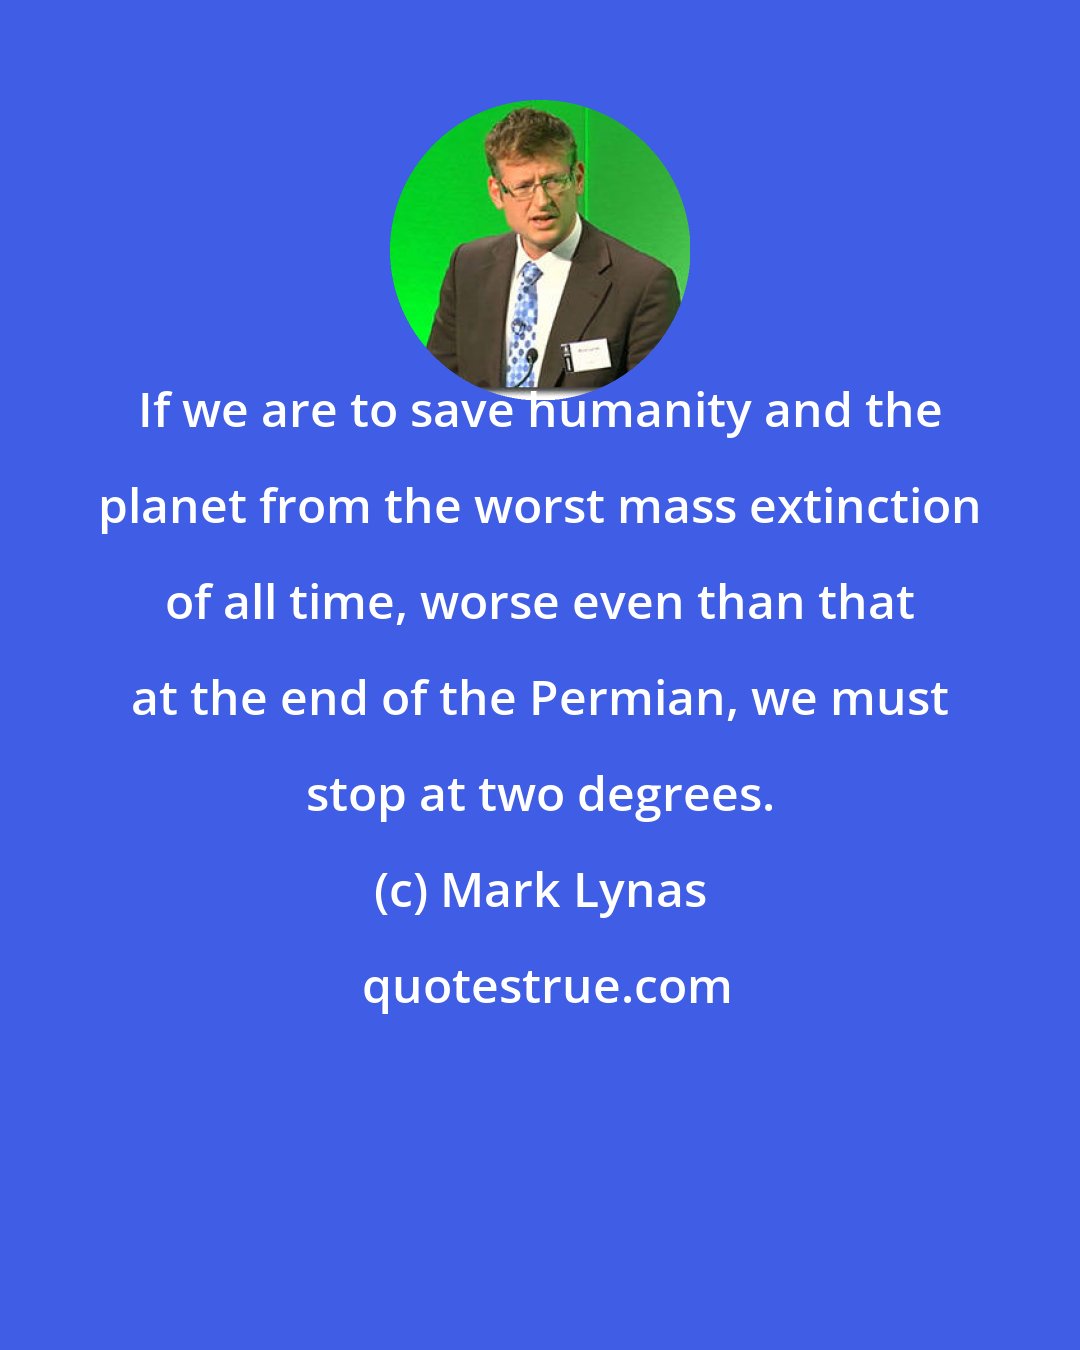 Mark Lynas: If we are to save humanity and the planet from the worst mass extinction of all time, worse even than that at the end of the Permian, we must stop at two degrees.